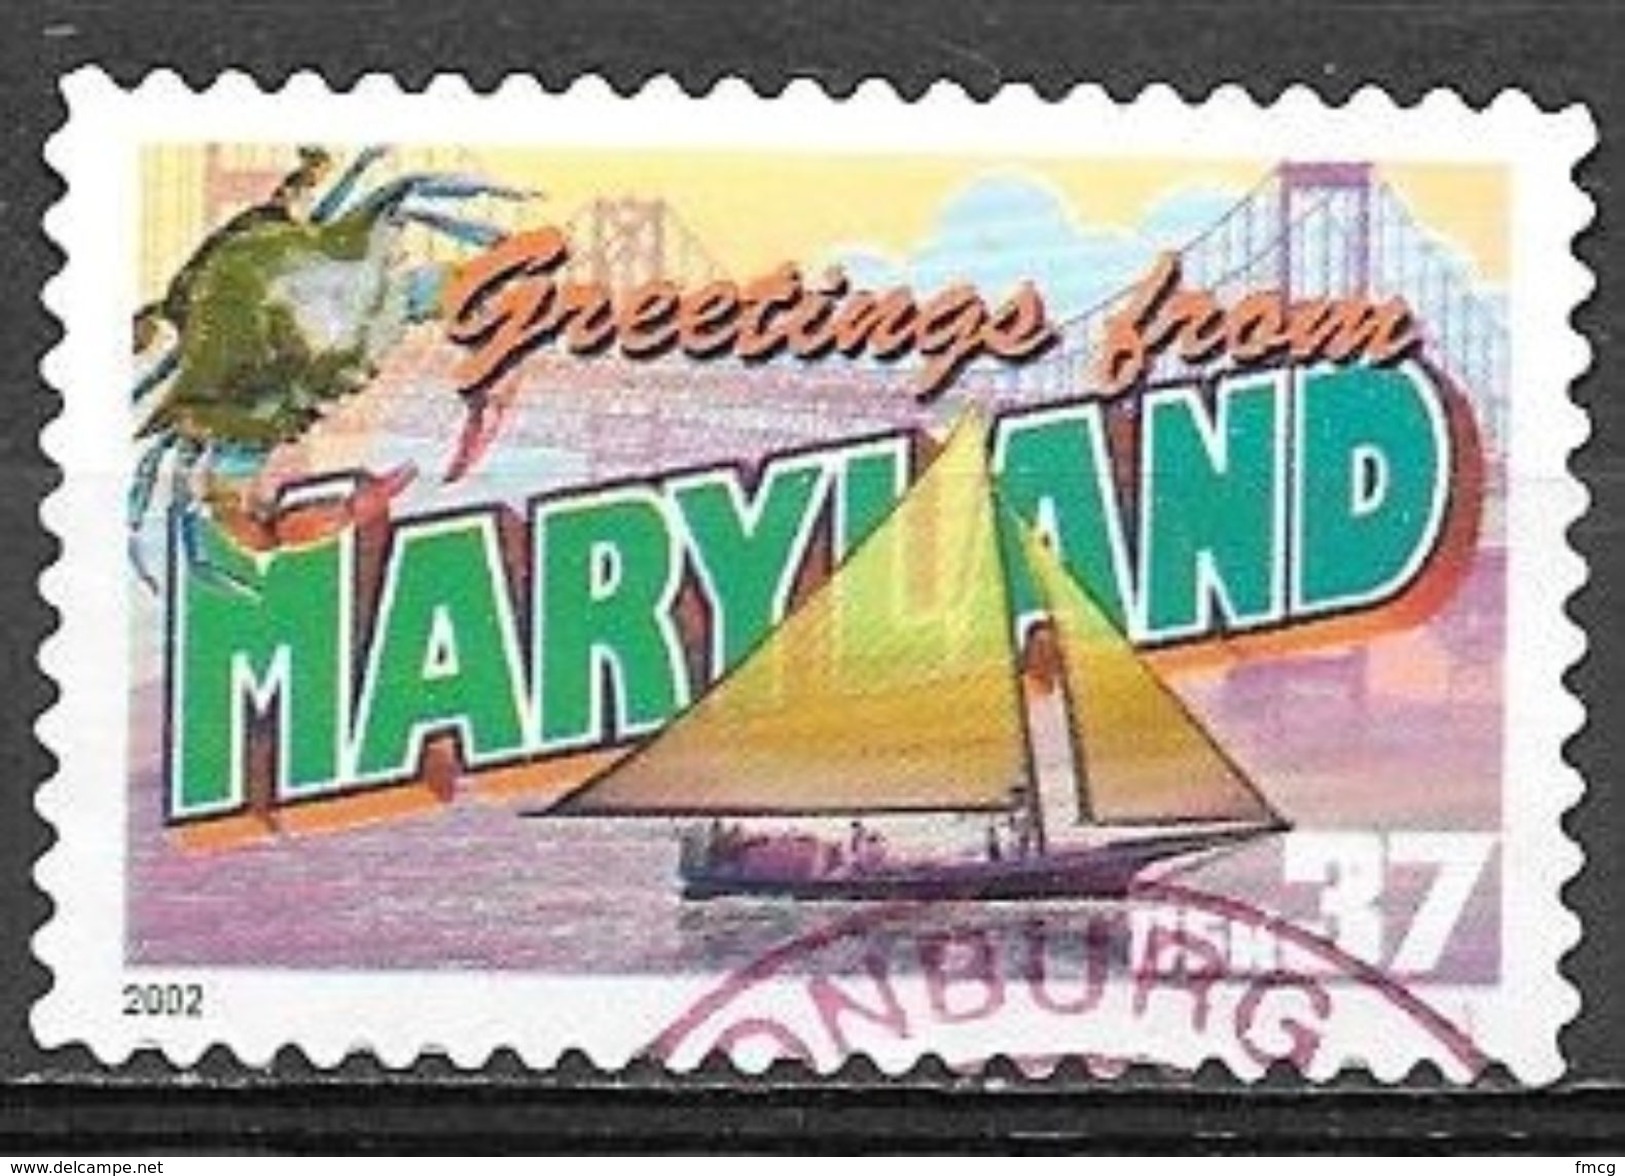 2002 37 Cents State Greetings, Maryland, Used - Used Stamps